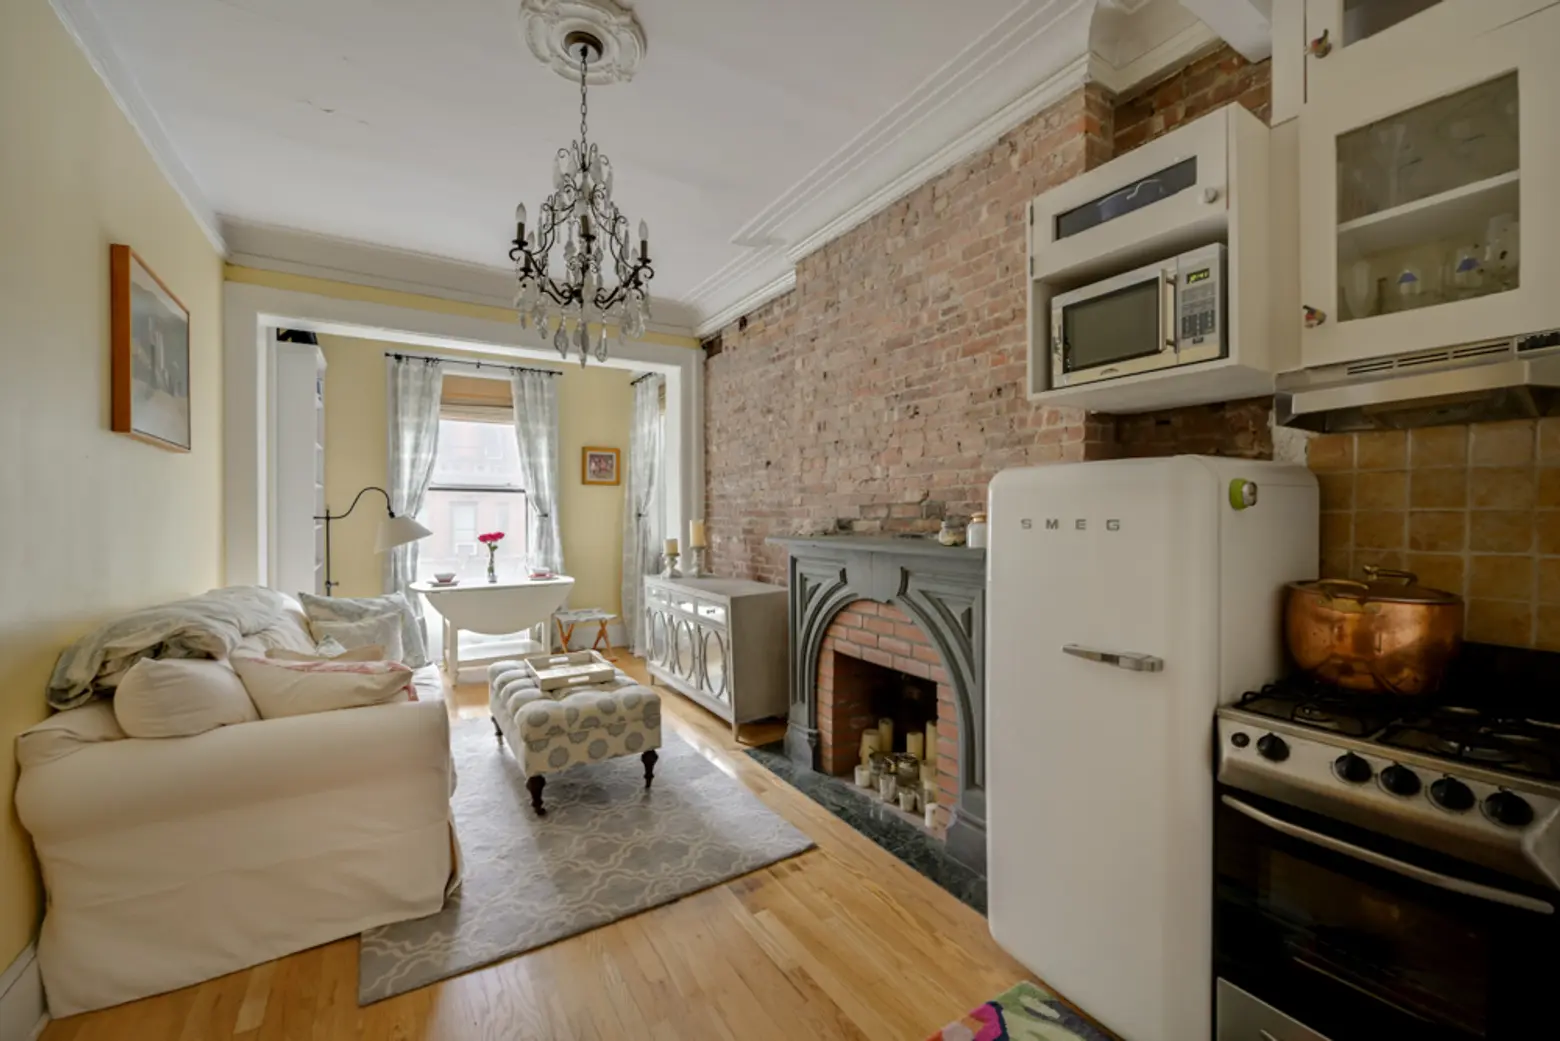 $540K one-bedroom is a cozy, country cottage on the Upper West Side